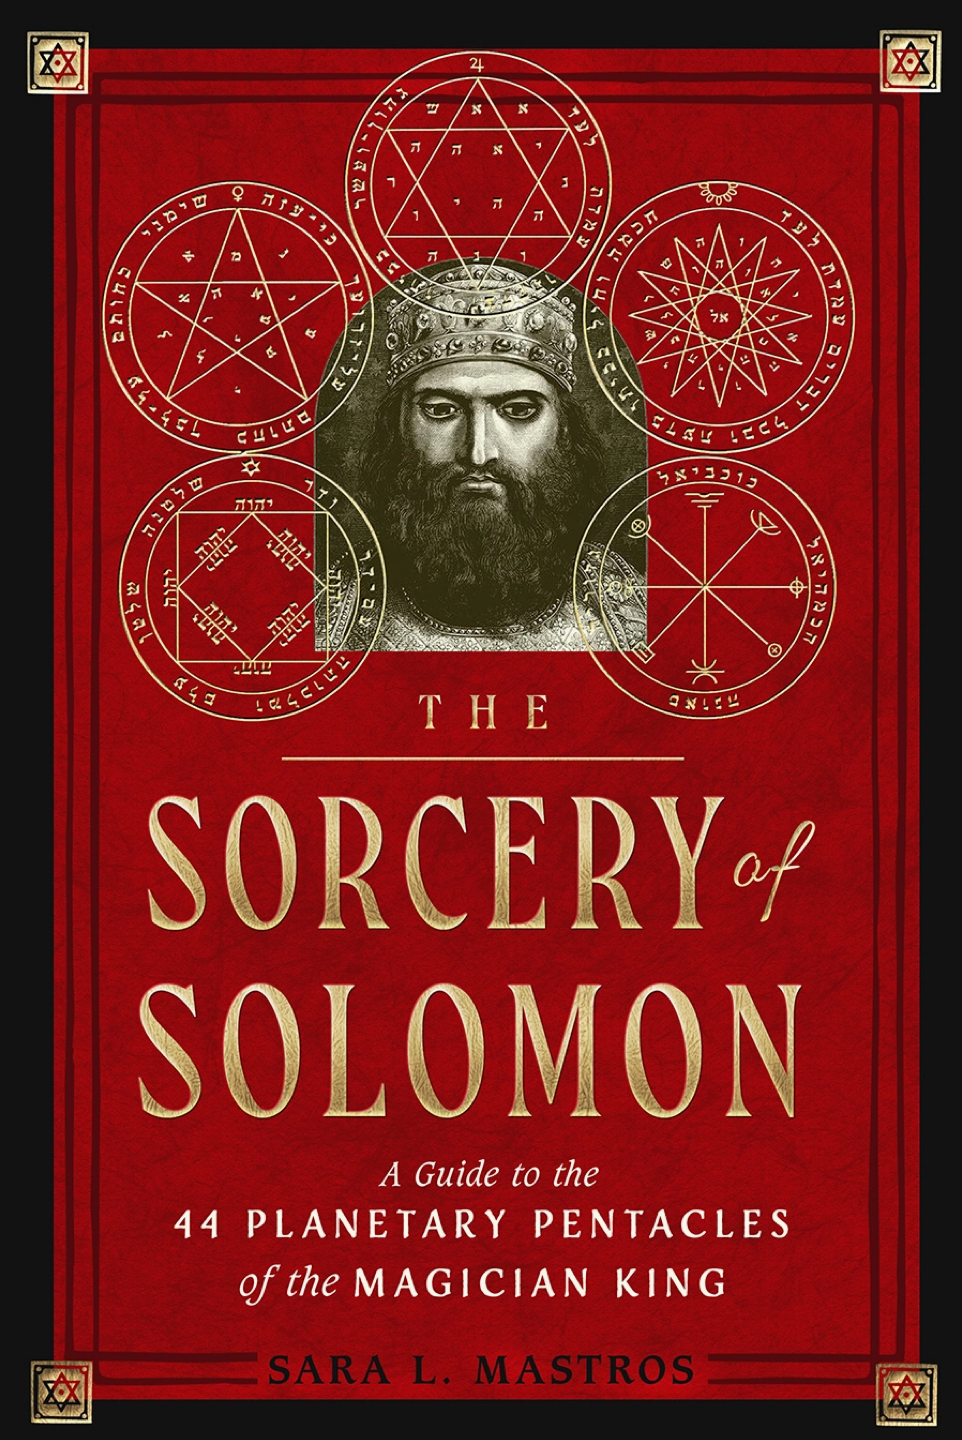 sorcery of Solomon: a guide to the 44 planetary pentacles